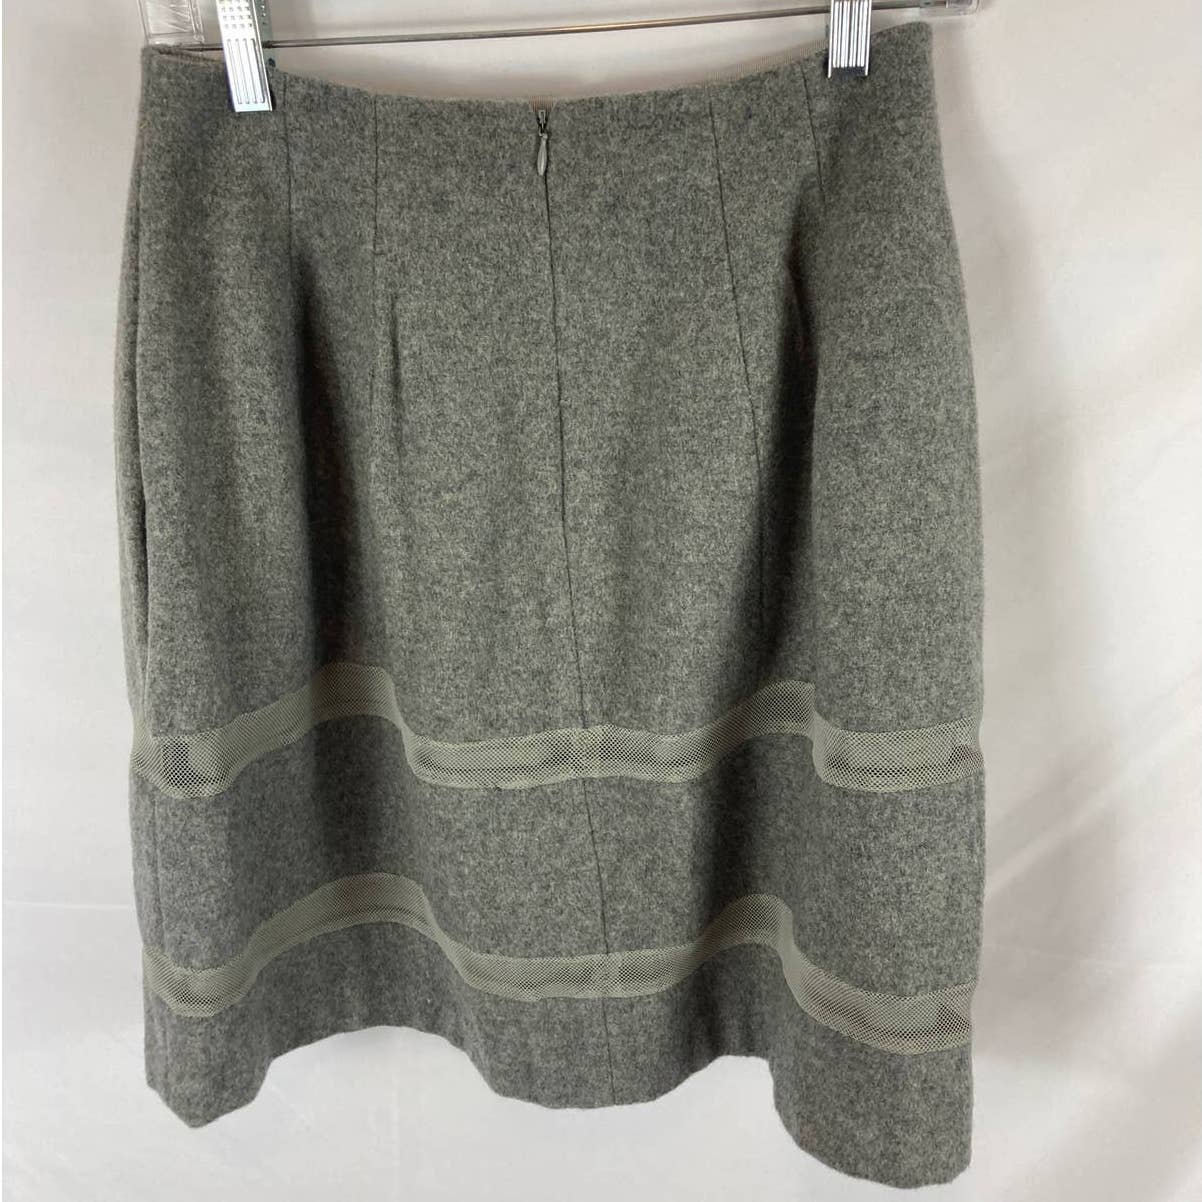 Special offer  Madewell Turnout skirt with mesh Detail Grey Size 2 MXXToBv9C outlet online shop